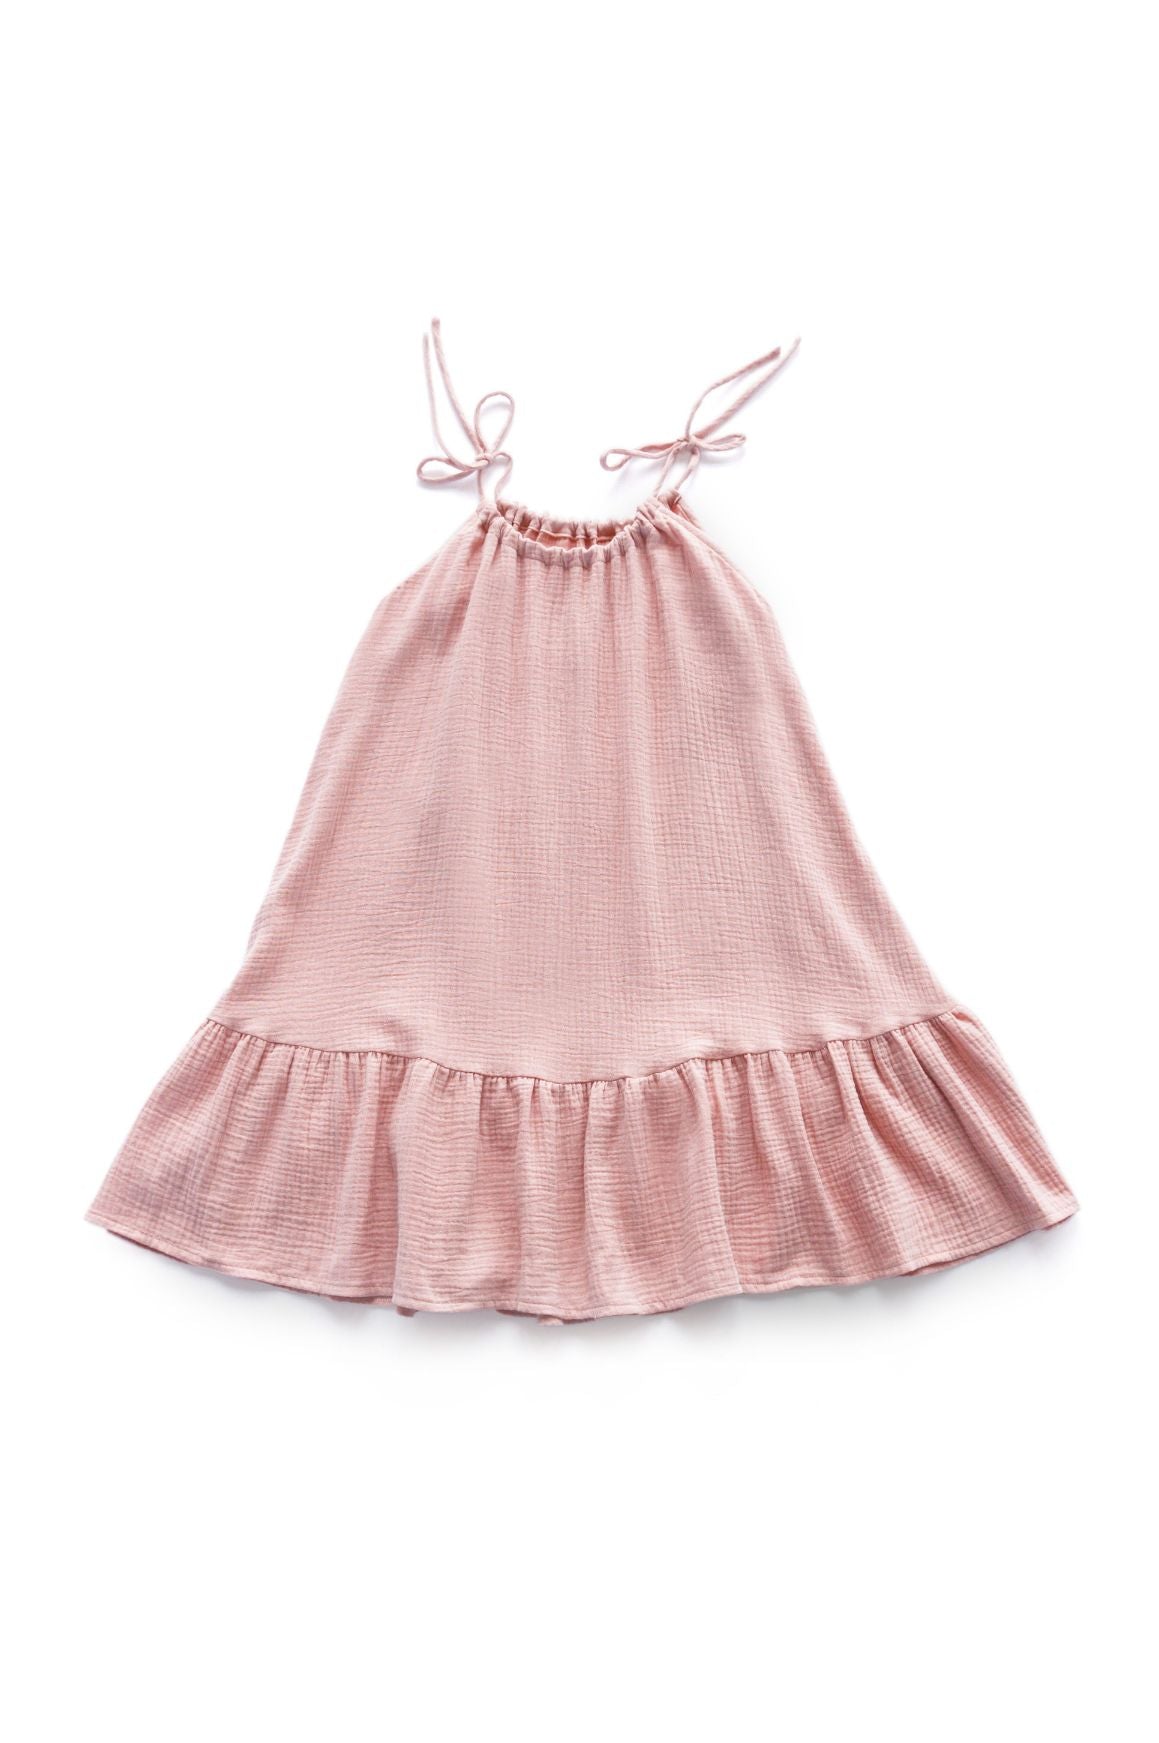 Sustainable girl's dress from lightweight, breathable organic muslin (GOTS) in dusty pink color. Handcrafted with love, made with no nasties, and allergy free. Mini Me dresses for Mommy and daughter matching are available. MiliMilu offers sustainable fashion for kids and women from organic and eco friendly materials.